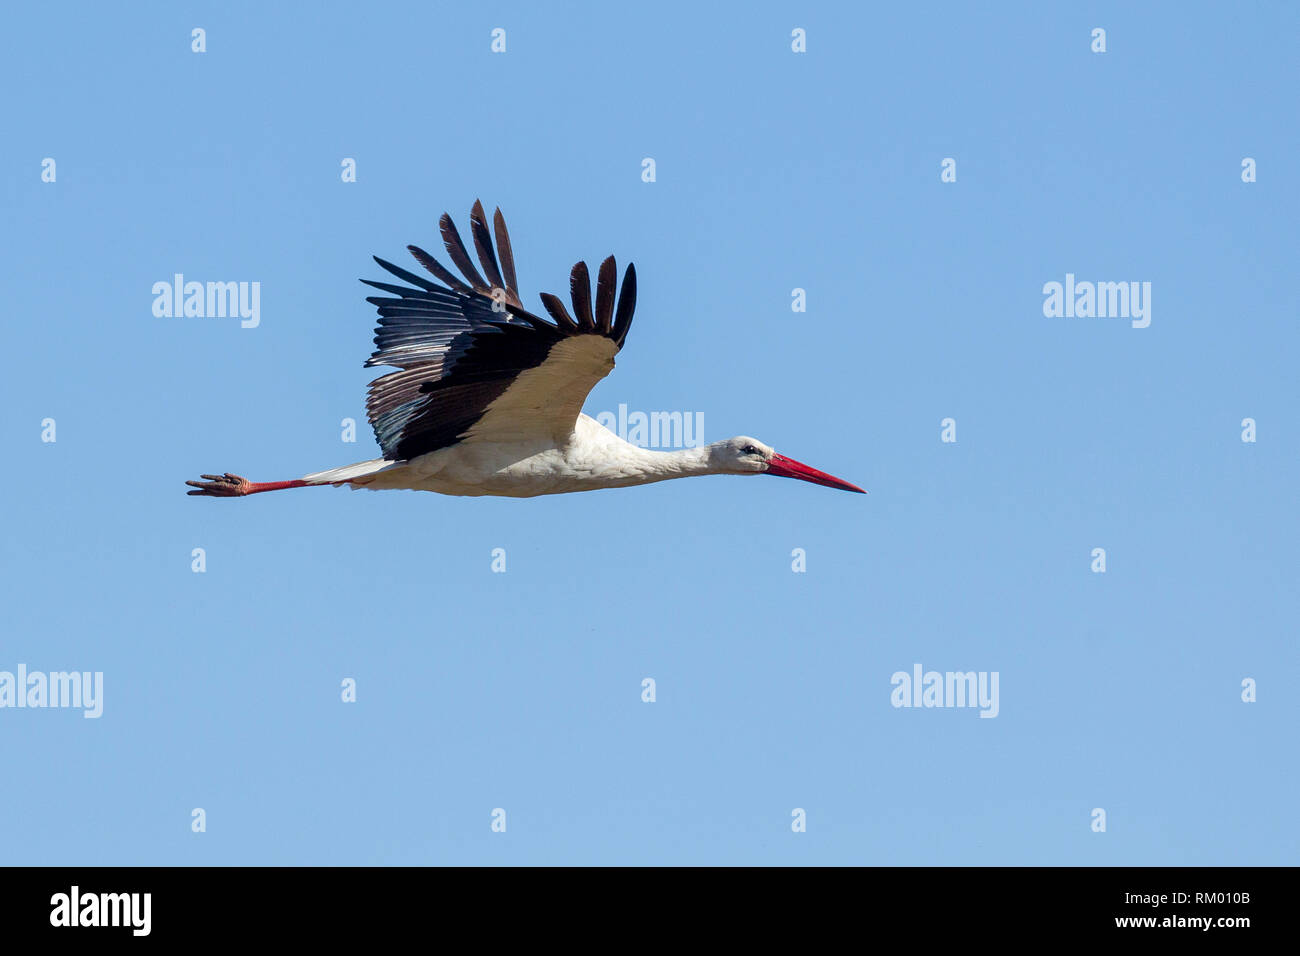 A single White Stork flying strongly, landscape format, Lewa Wilderness, Lewa Conservancy, Kenya, Africa Stock Photo